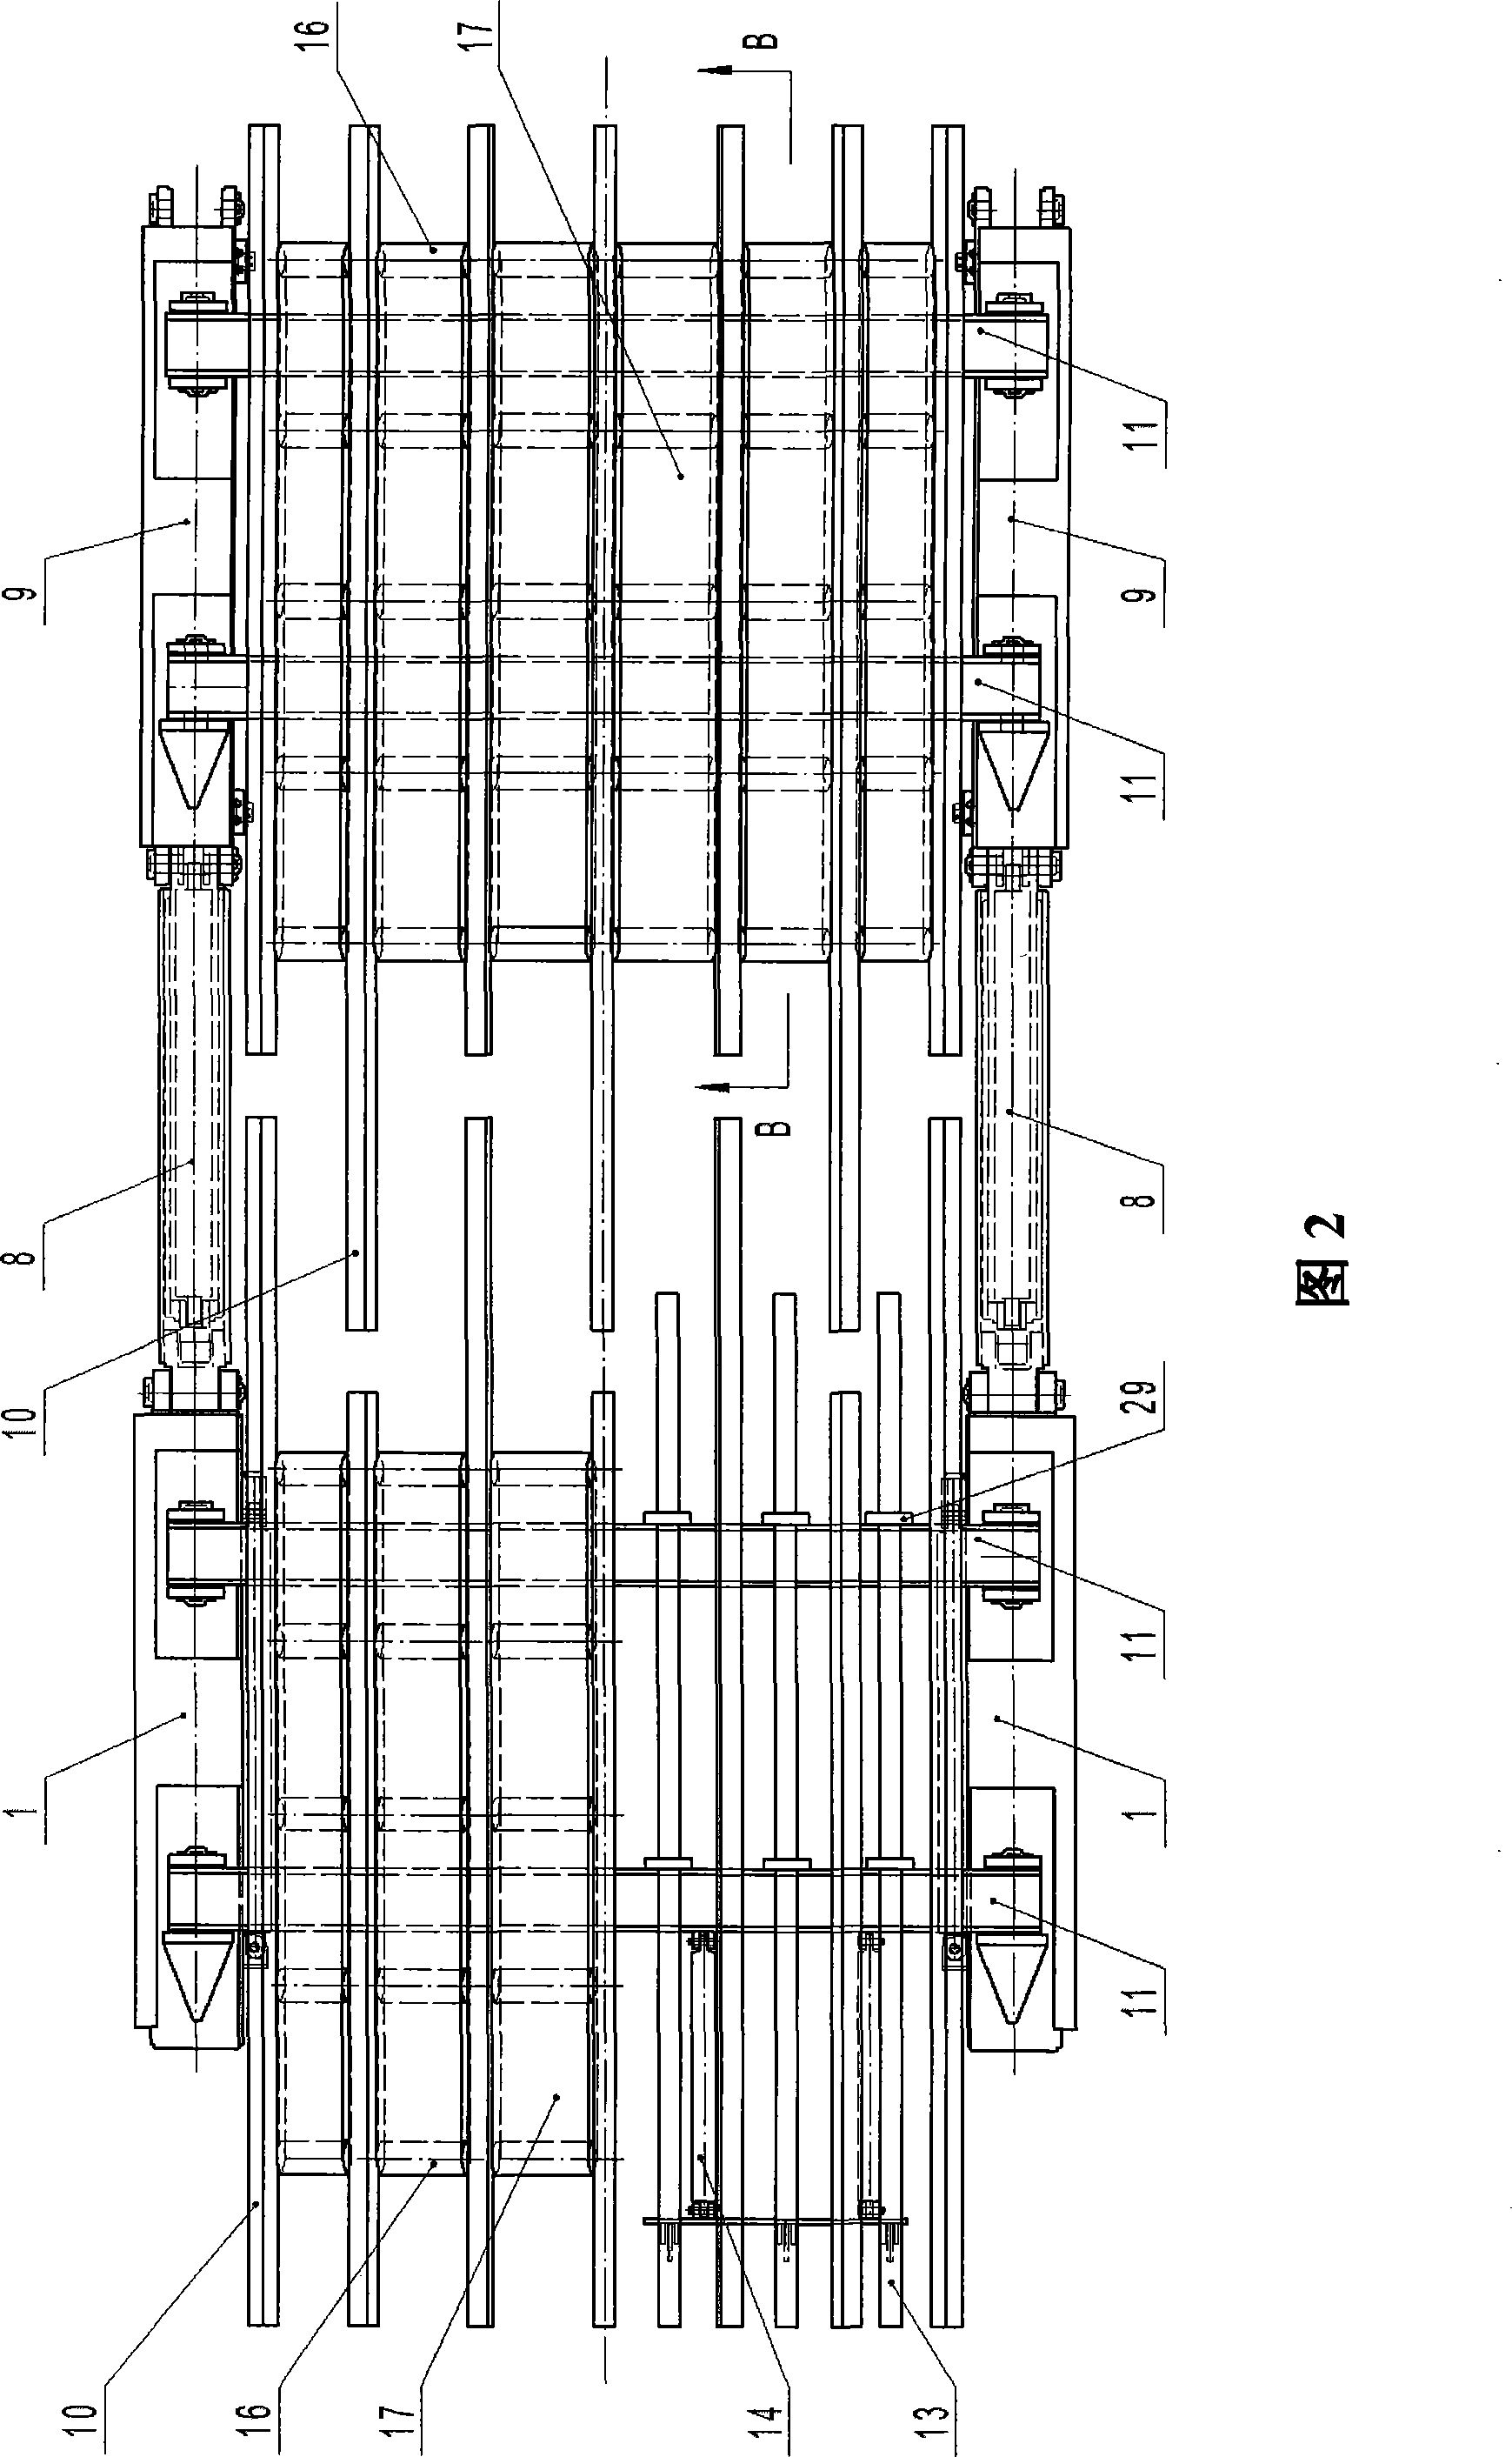 Immediate support device for digging machine